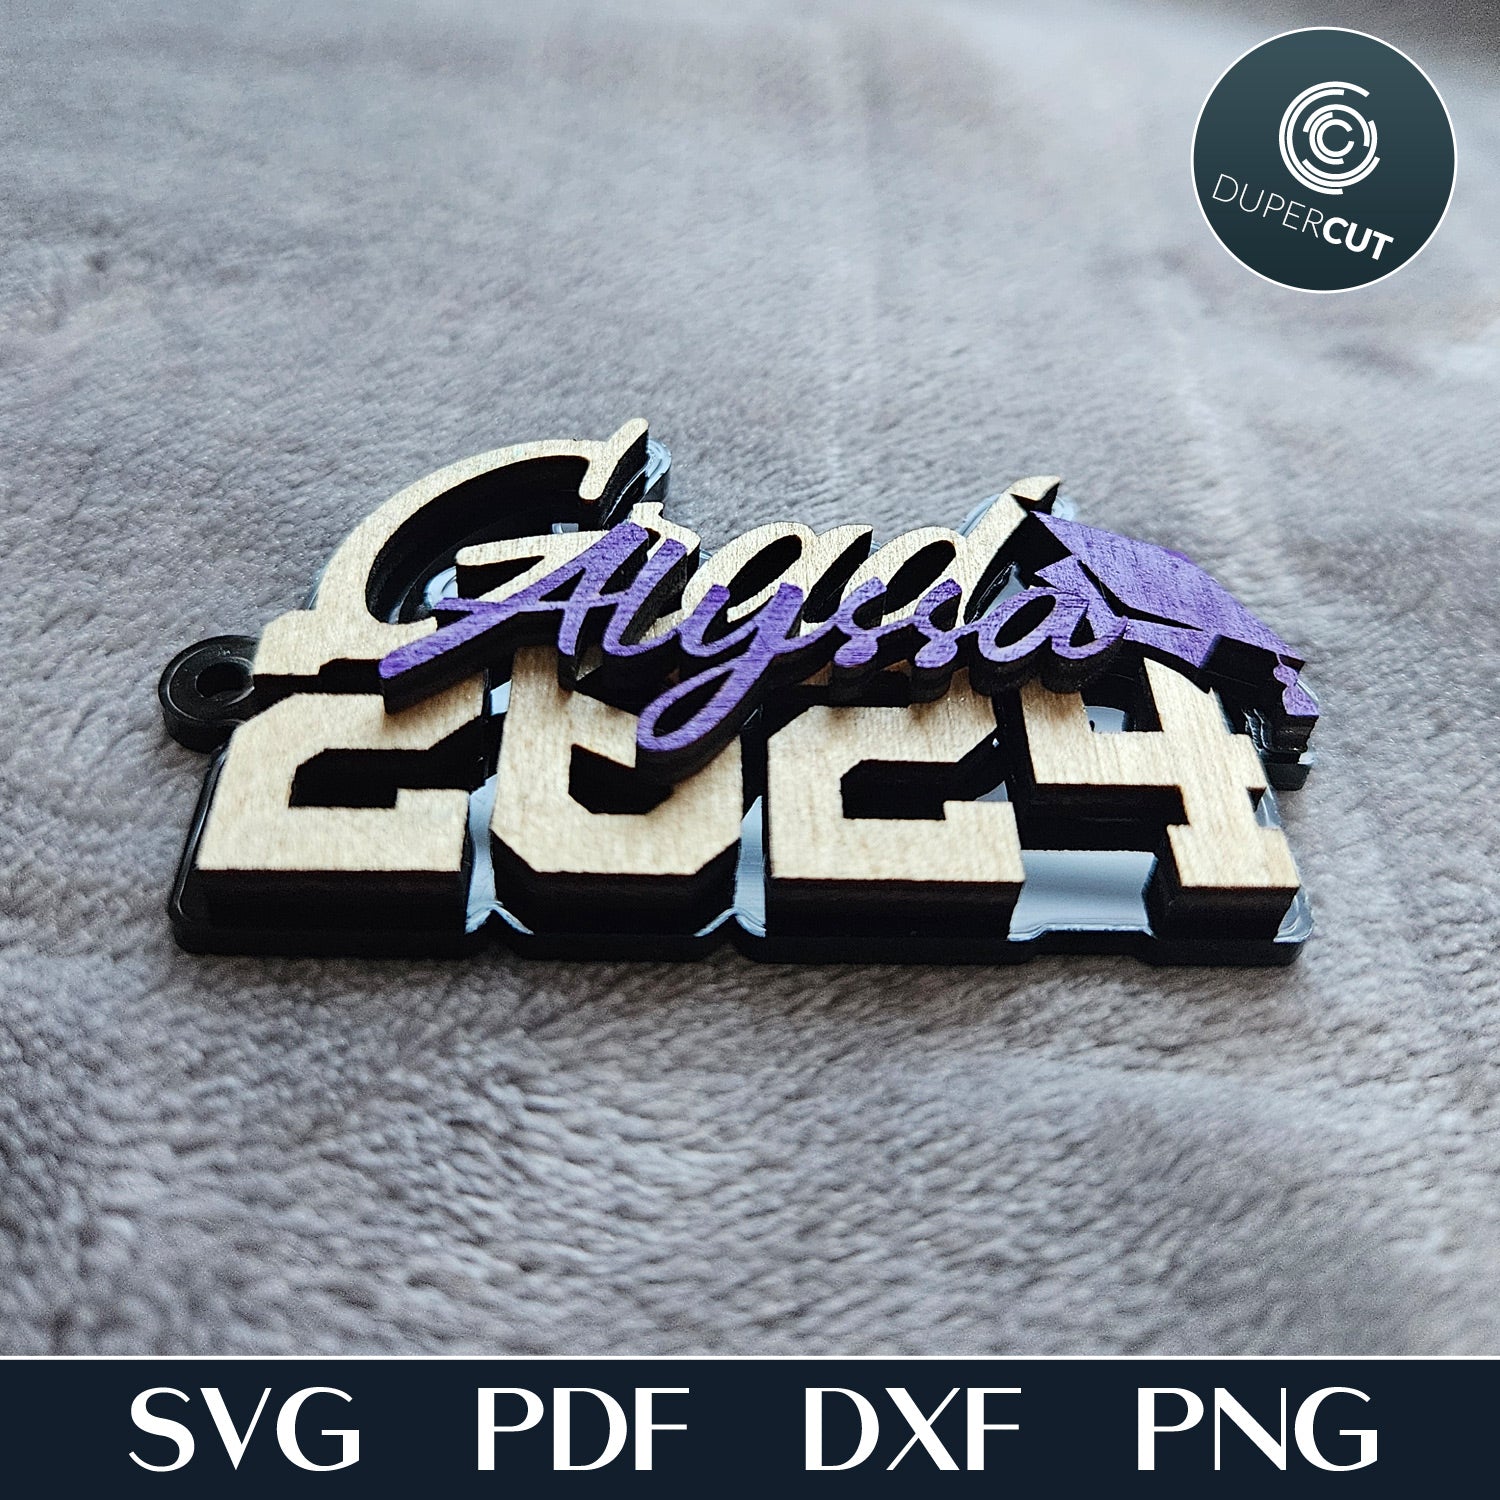 Congrats grad 2024 layered keychain, bag charm, personalized grad gift - SVG DXF vector files for laser cutting, cricut, xtool, CNC plasma machines by www.dupercut.com